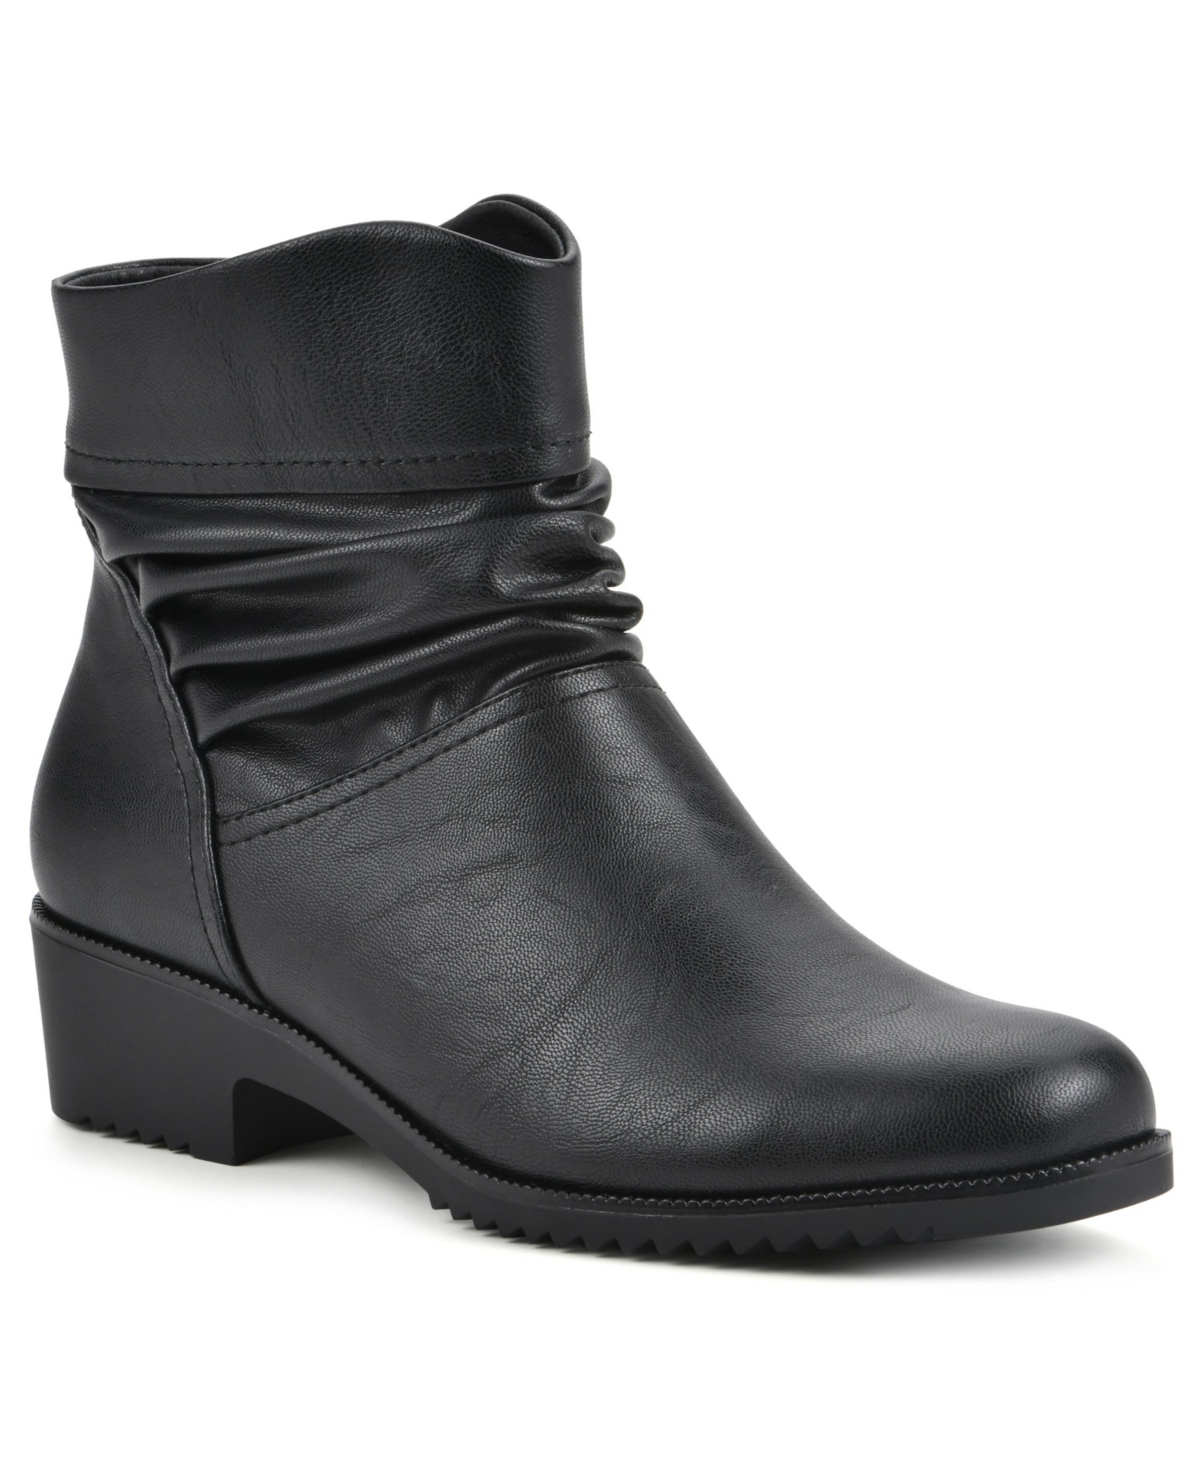 Women's Durbon Ankle Boot - Black, Smooth